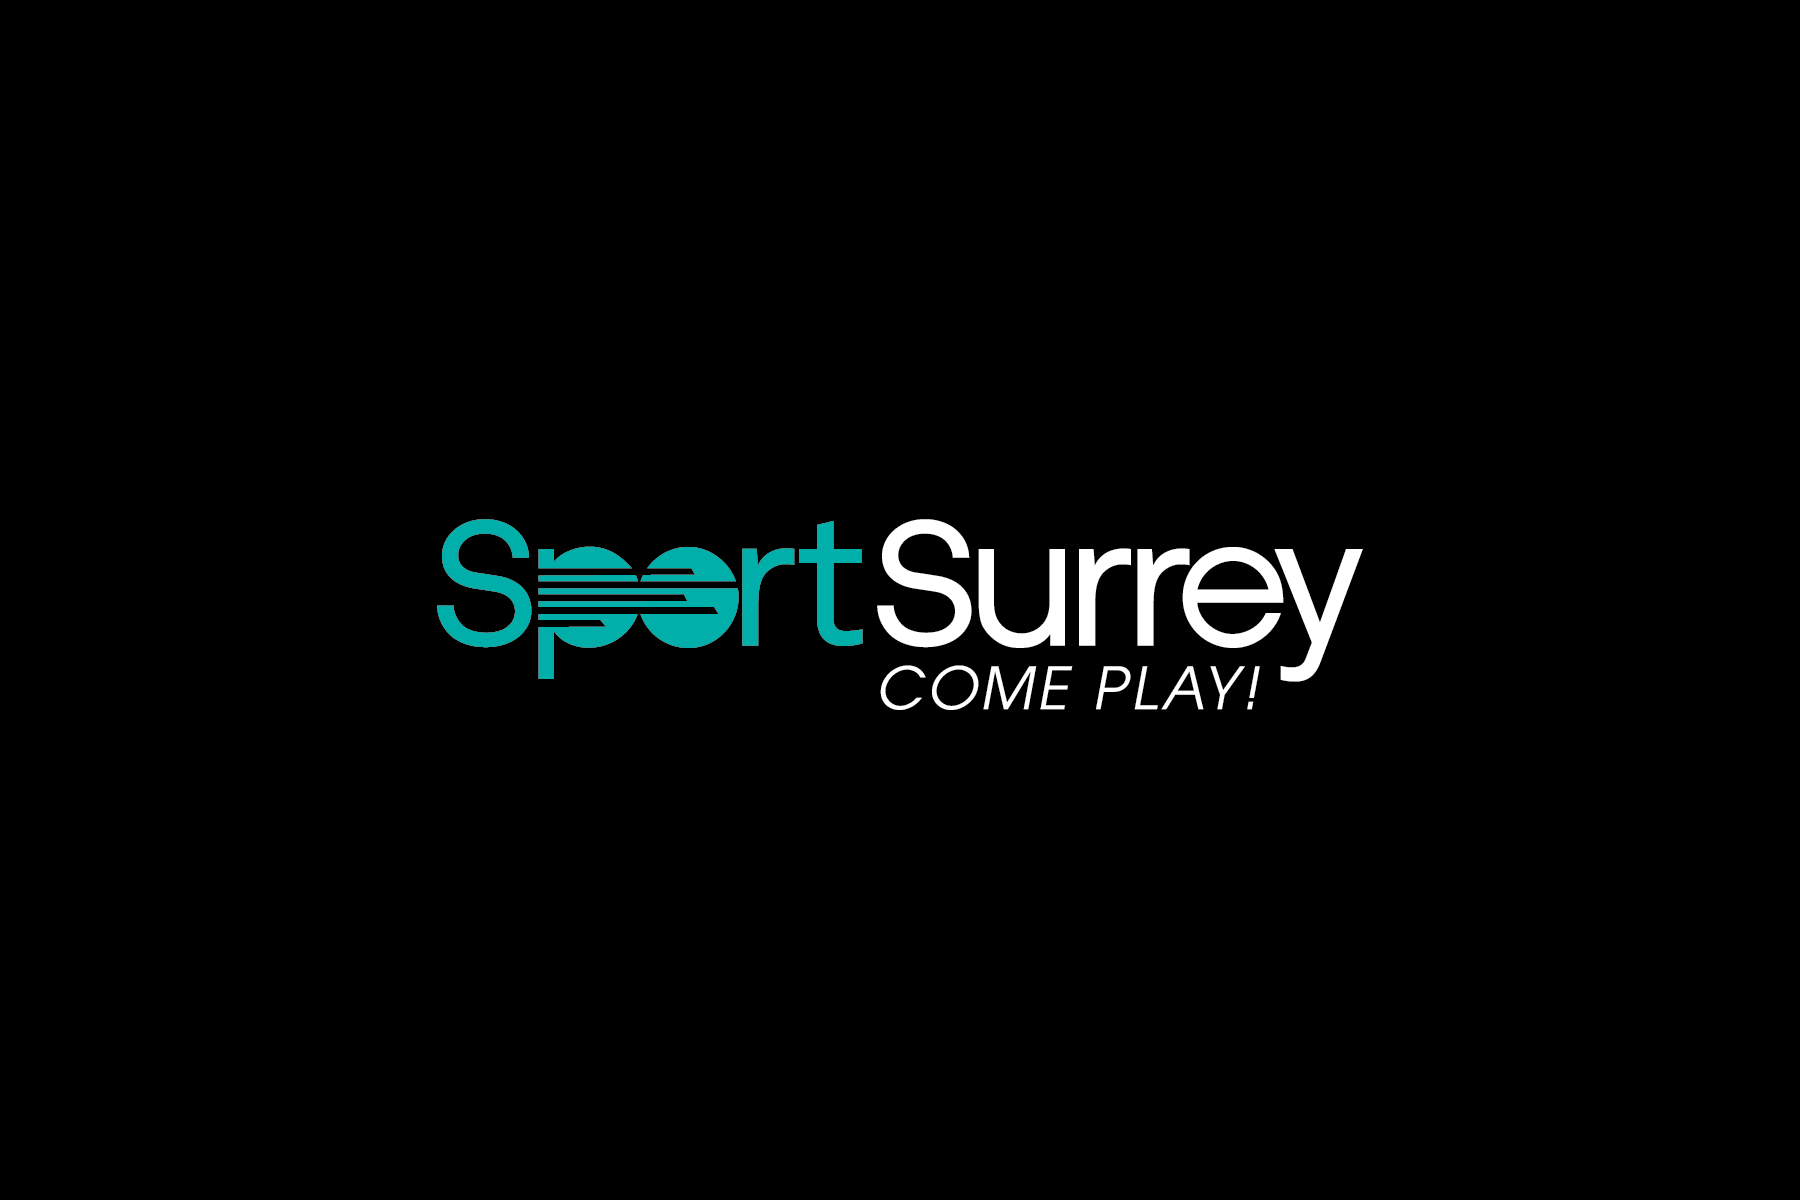 Hangar 18 create an identity that represented Sport Surrey qualities and Surrey’s world class facilities, featuring a teal and white refreshed logo/tagline